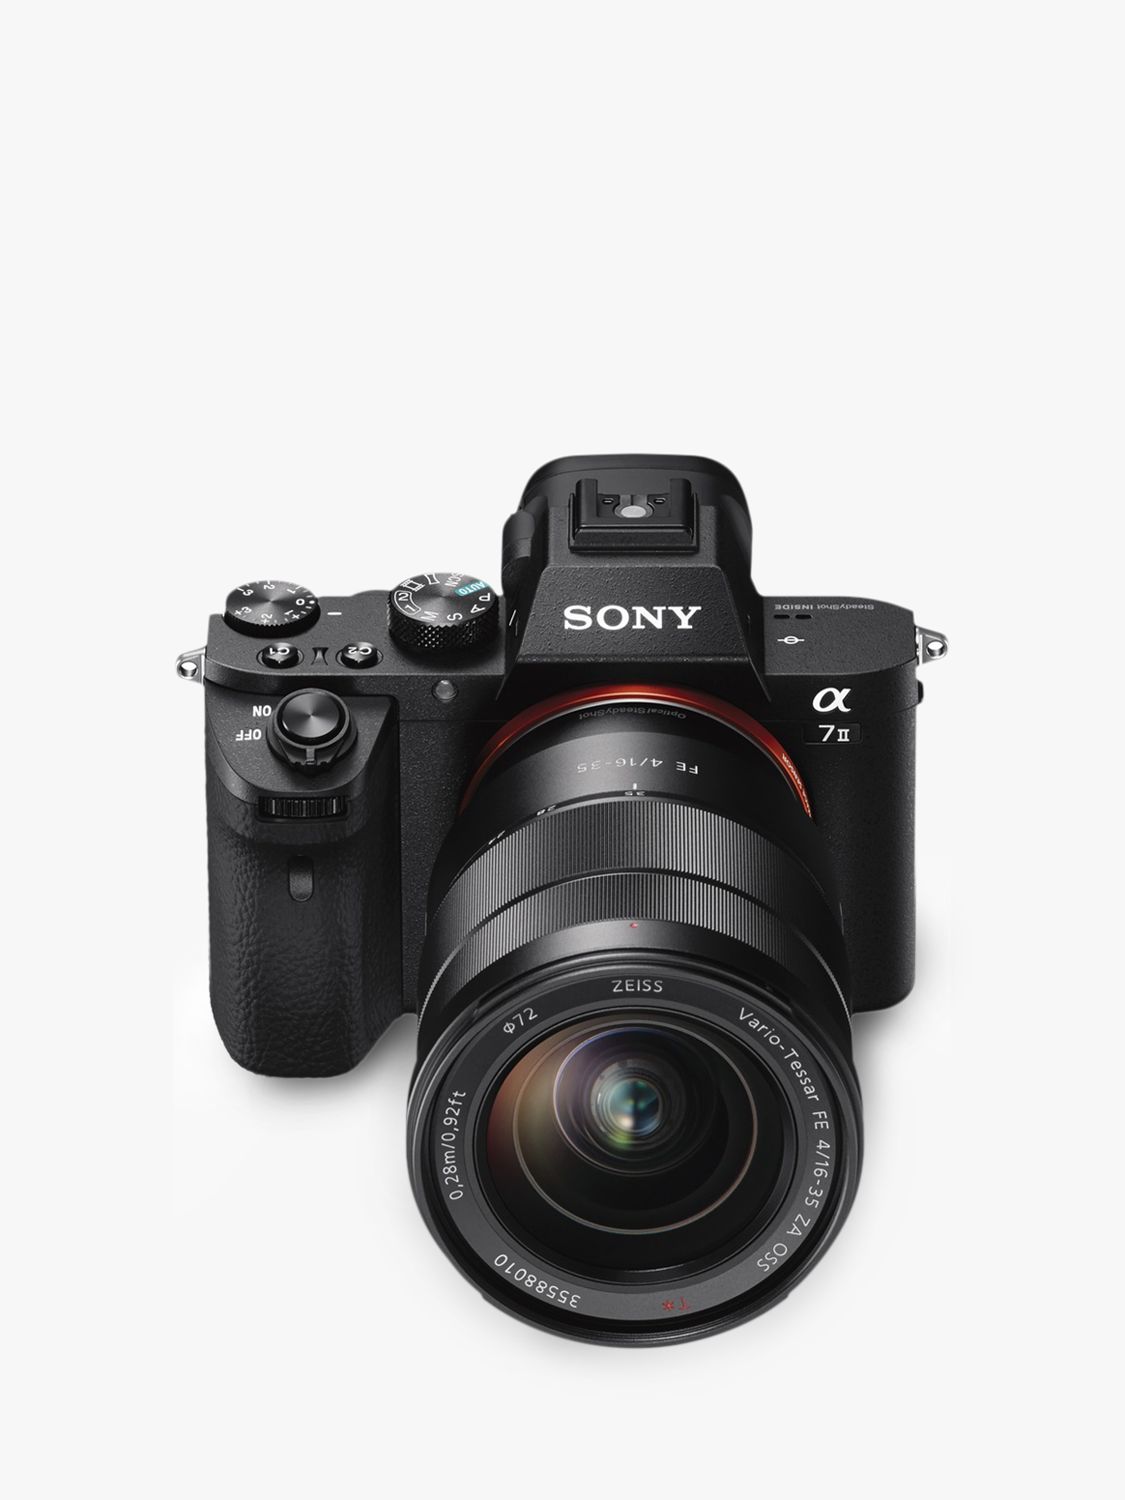 Sony a7 II (Alpha ILCE-7M2) Compact System Camera With HD 1080p, 24.3MP,  Wi-Fi,